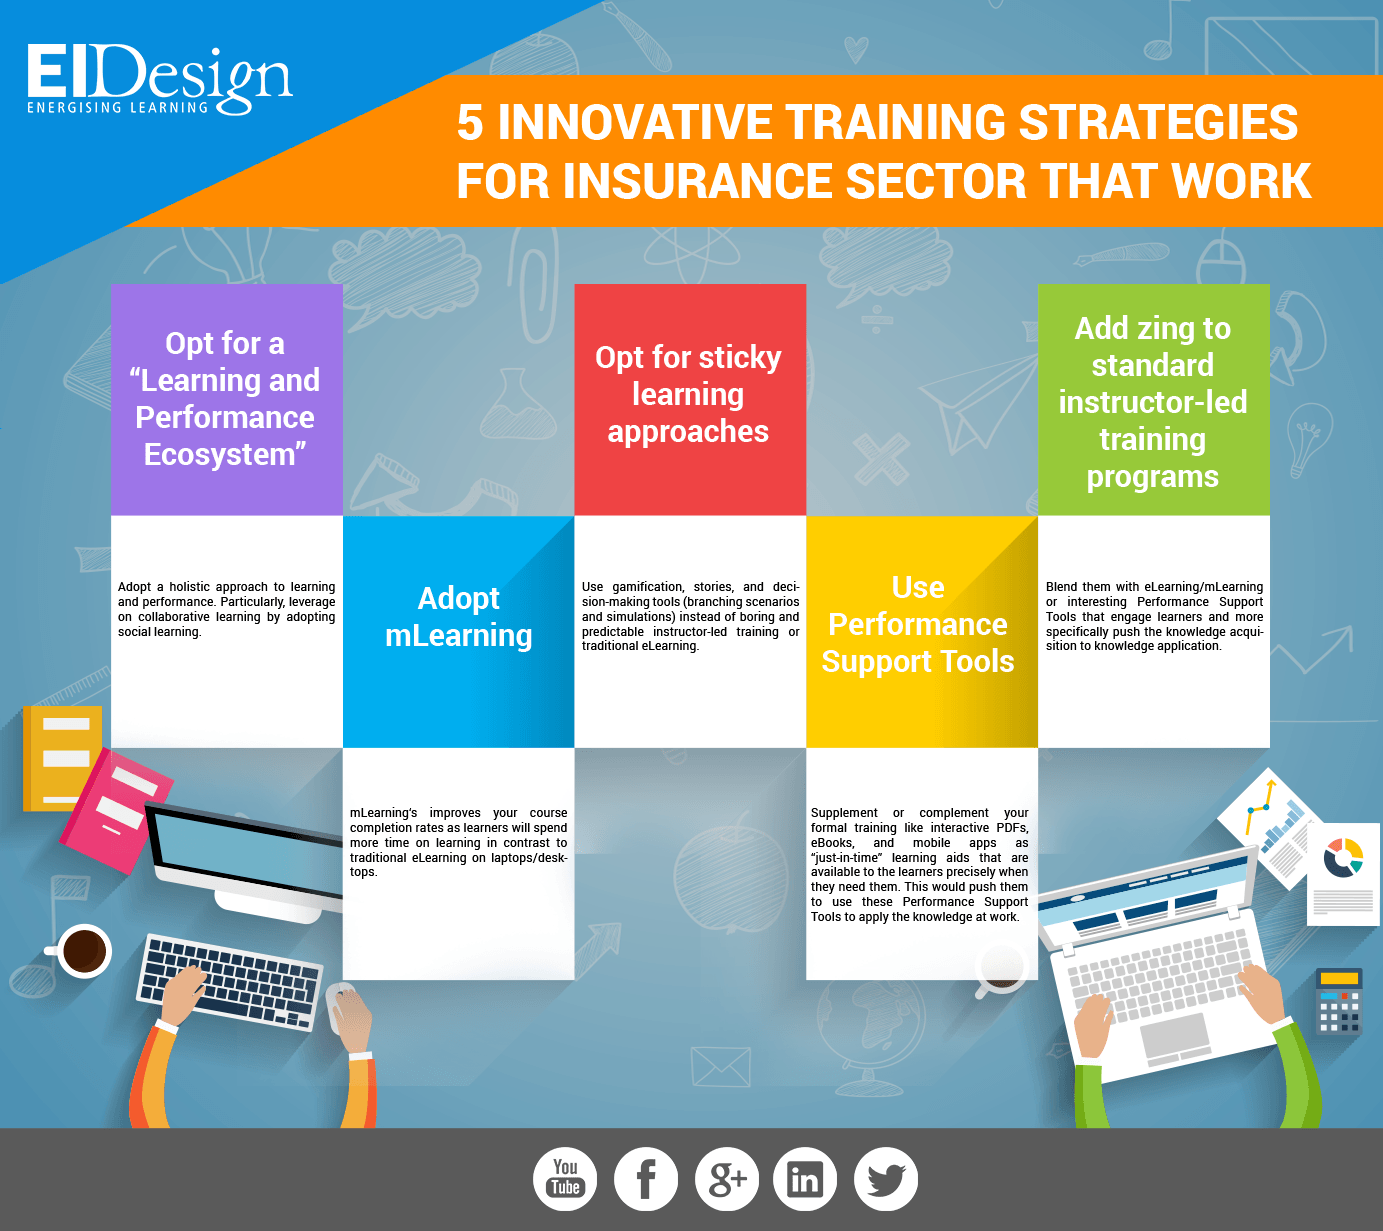 5 Innovative Training Strategies for Insurance Sector that work